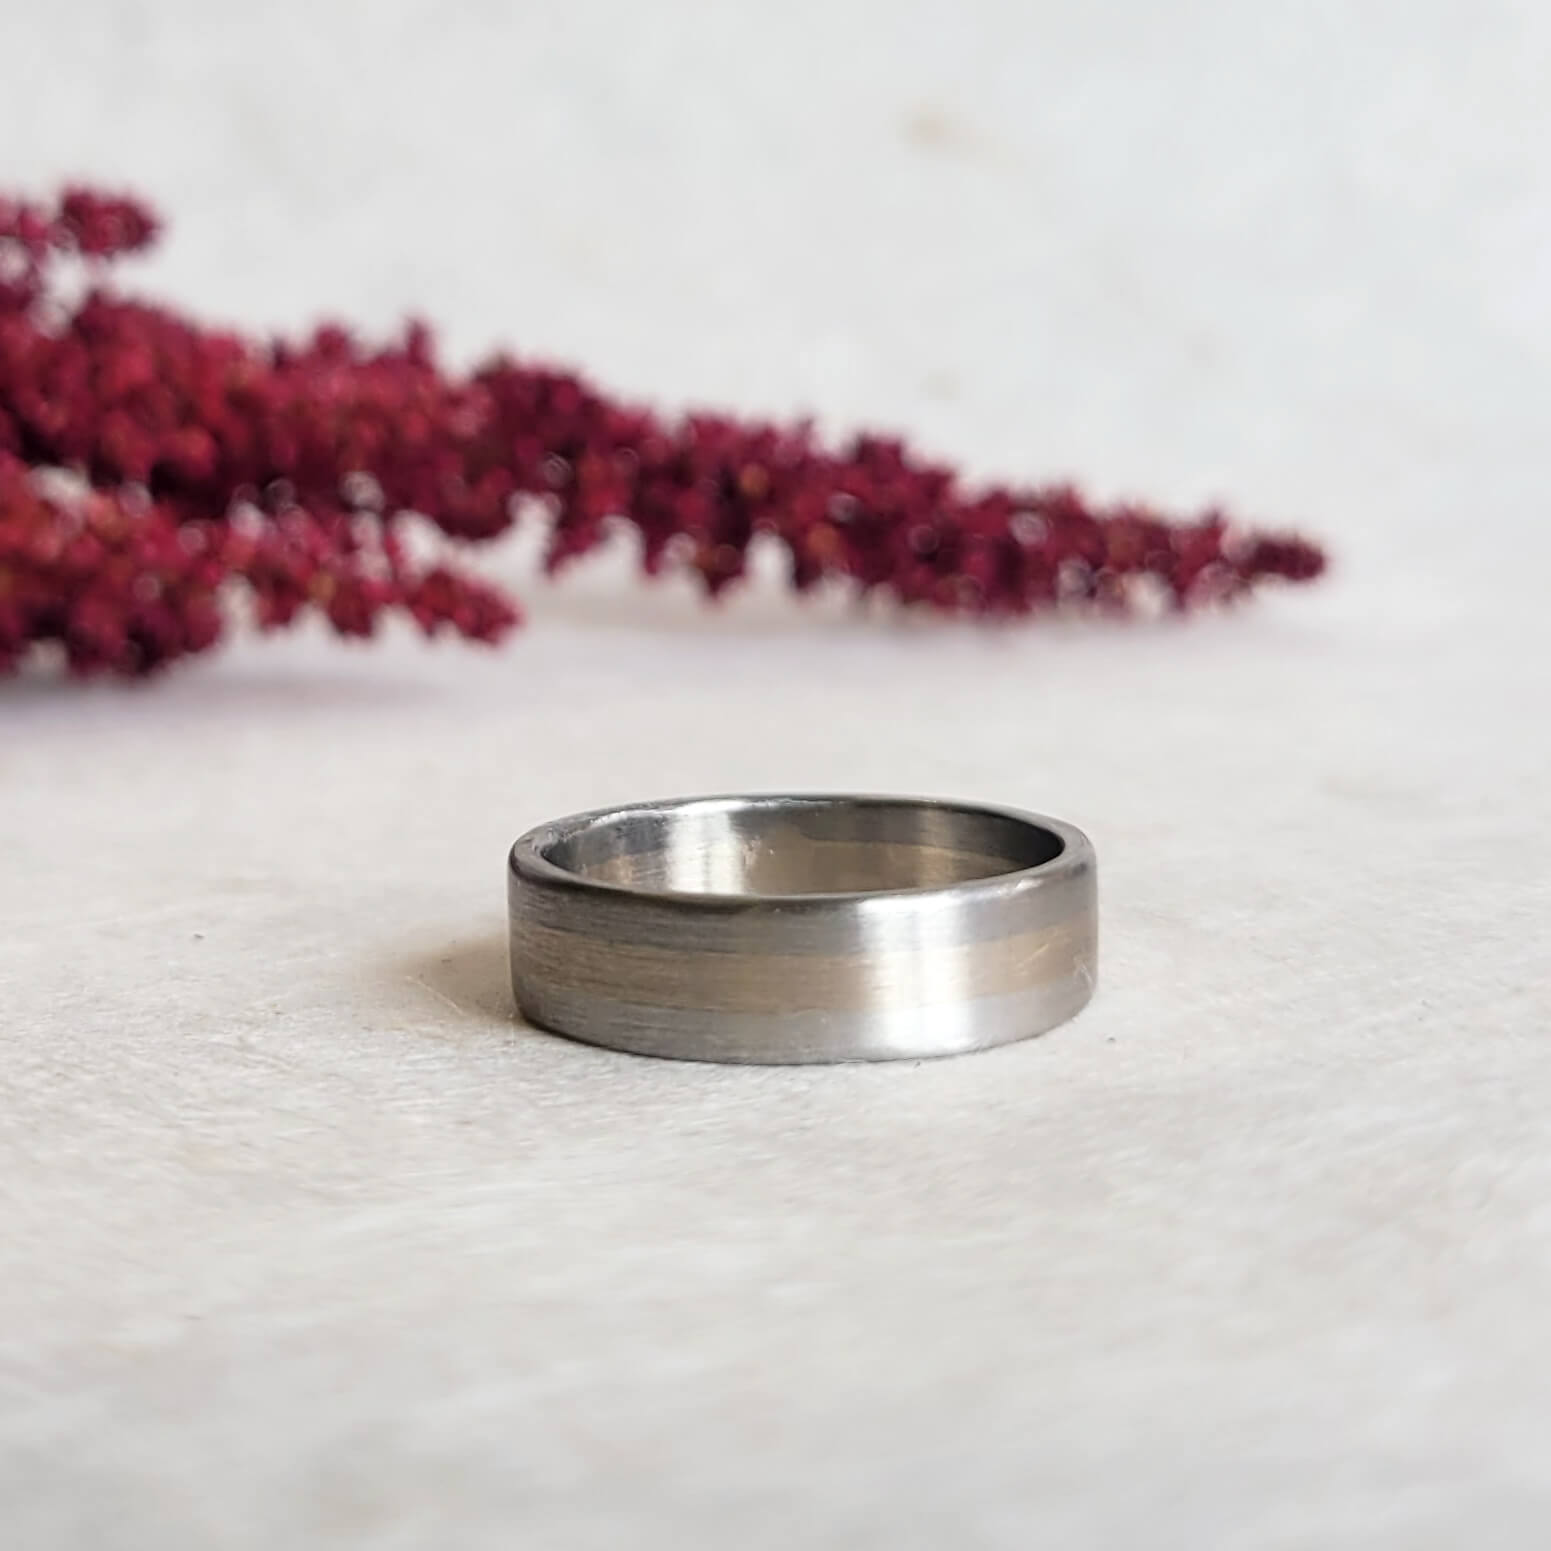 Ombre wedding band in palladium and white gold. Handmade with recycled metal.